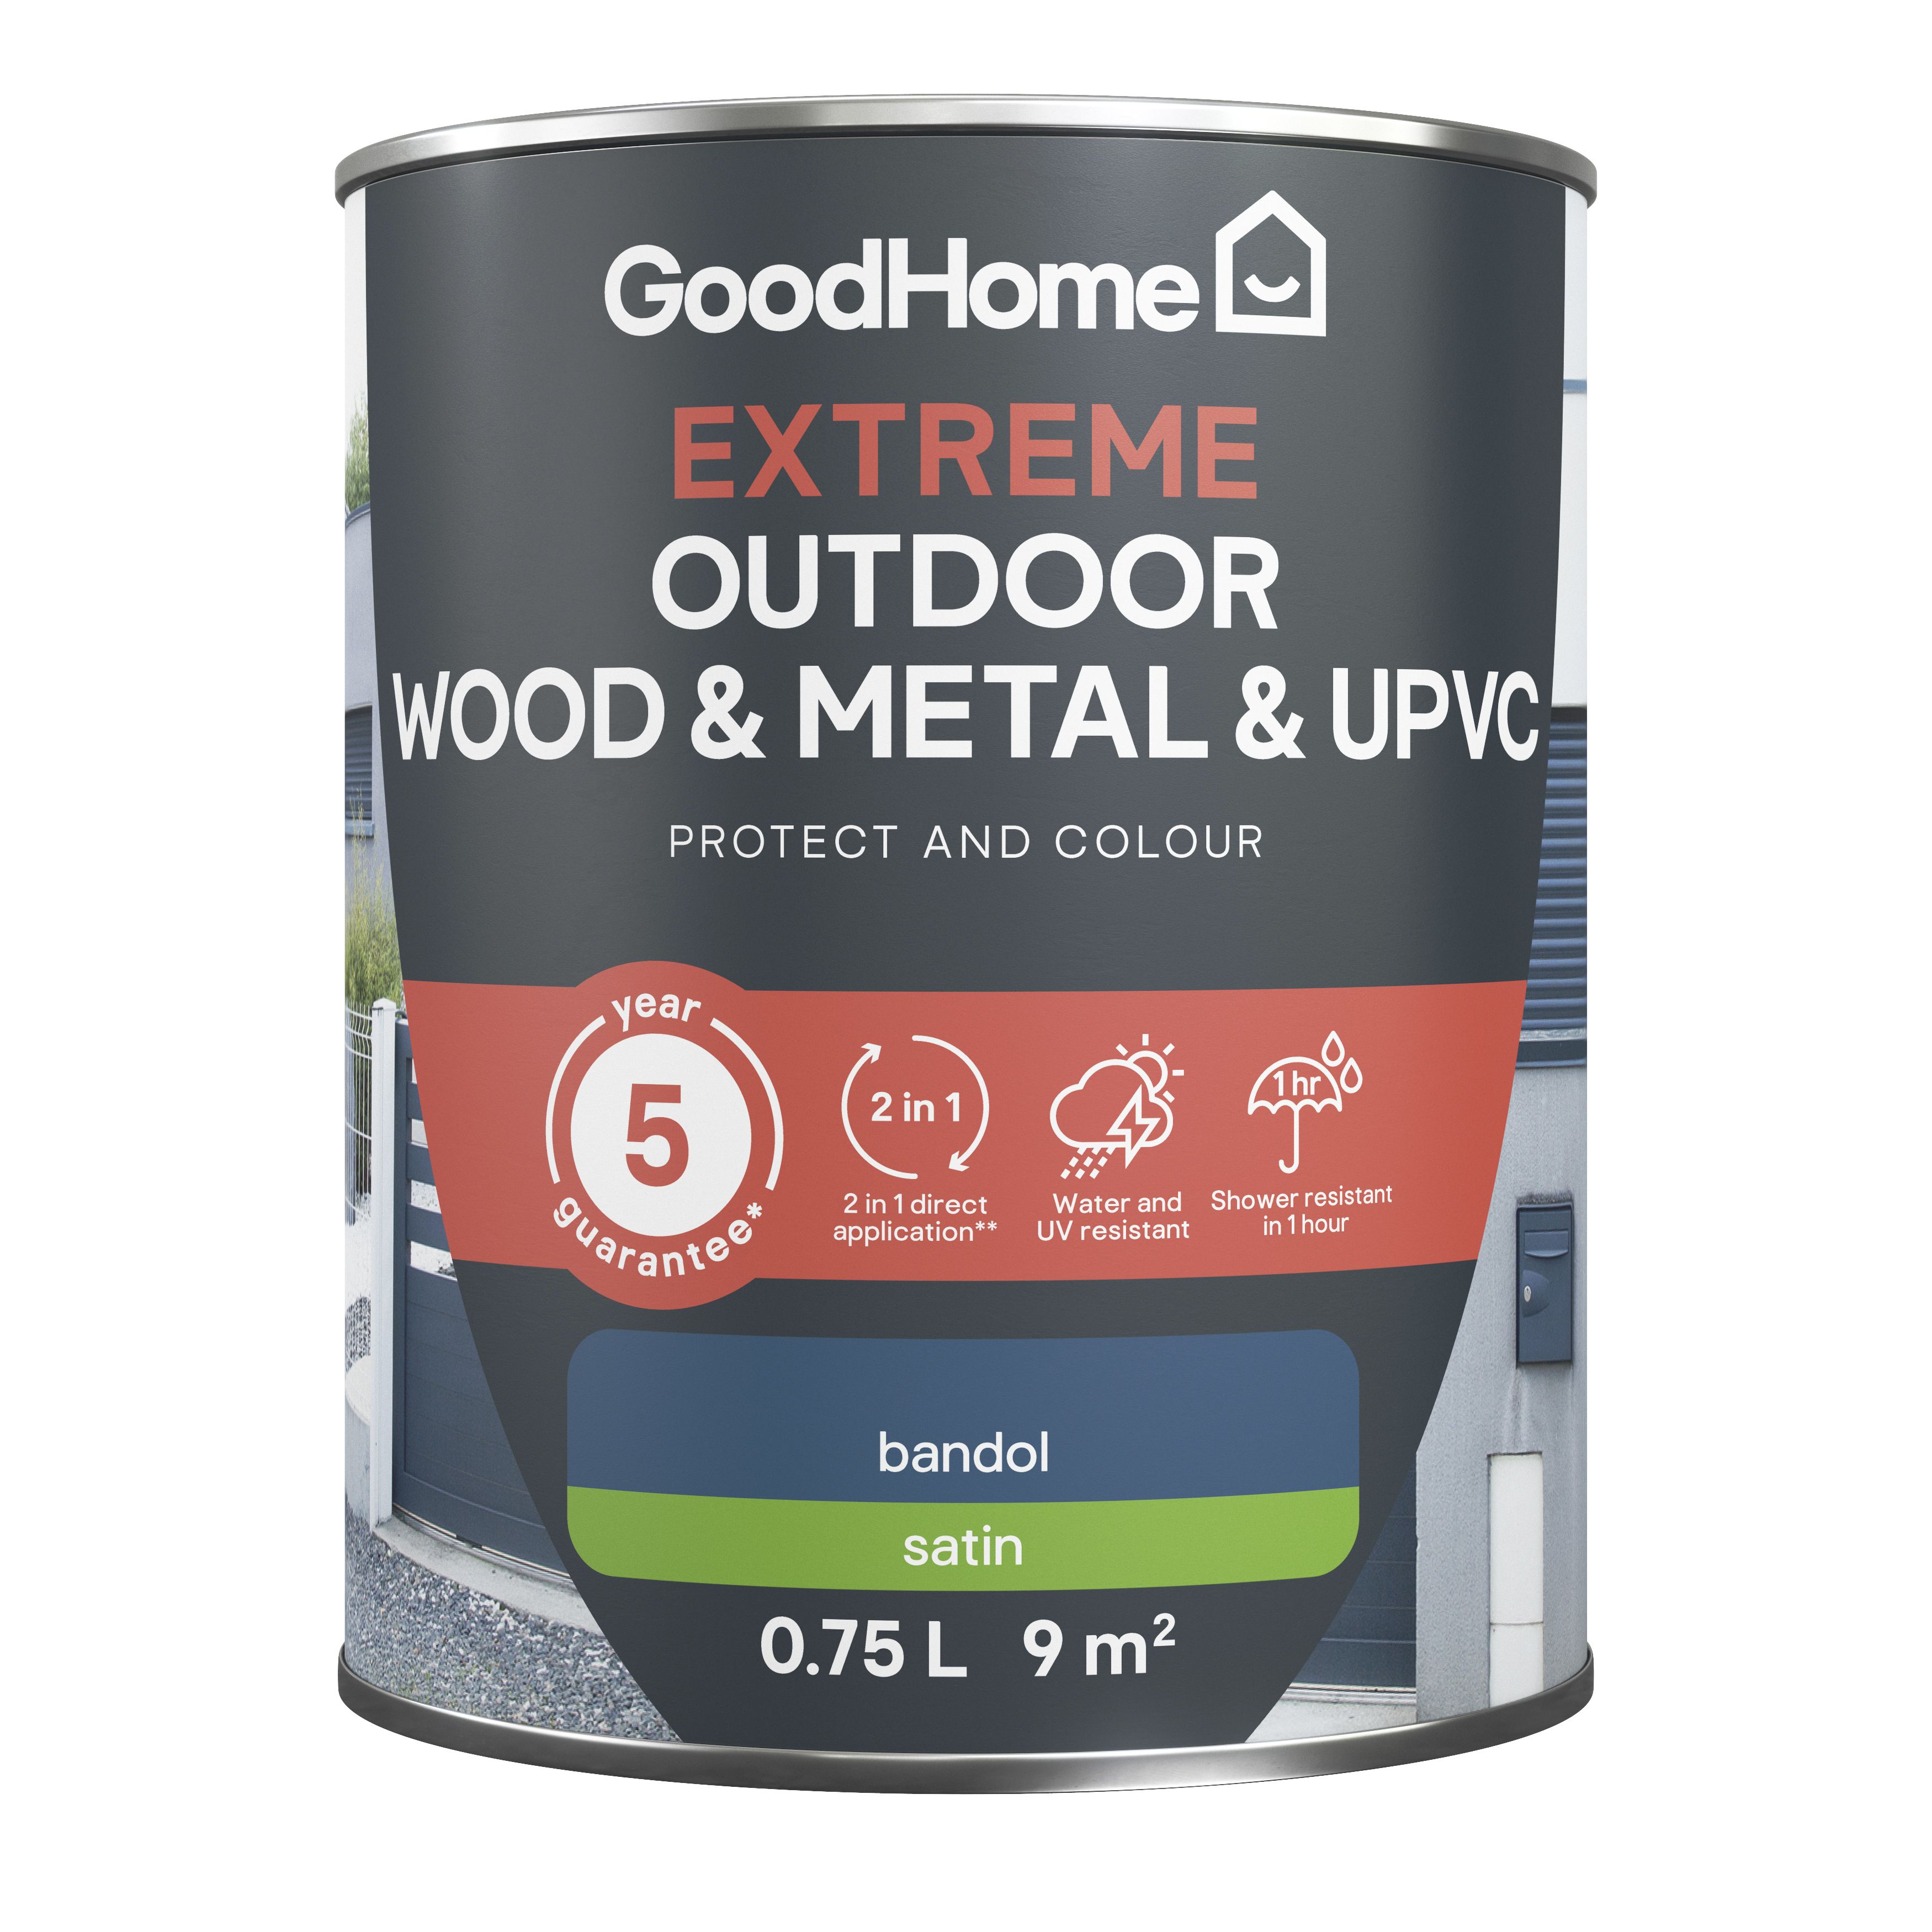 GoodHome Extreme Outdoor Bandol Satinwood Multi-surface paint, 750ml